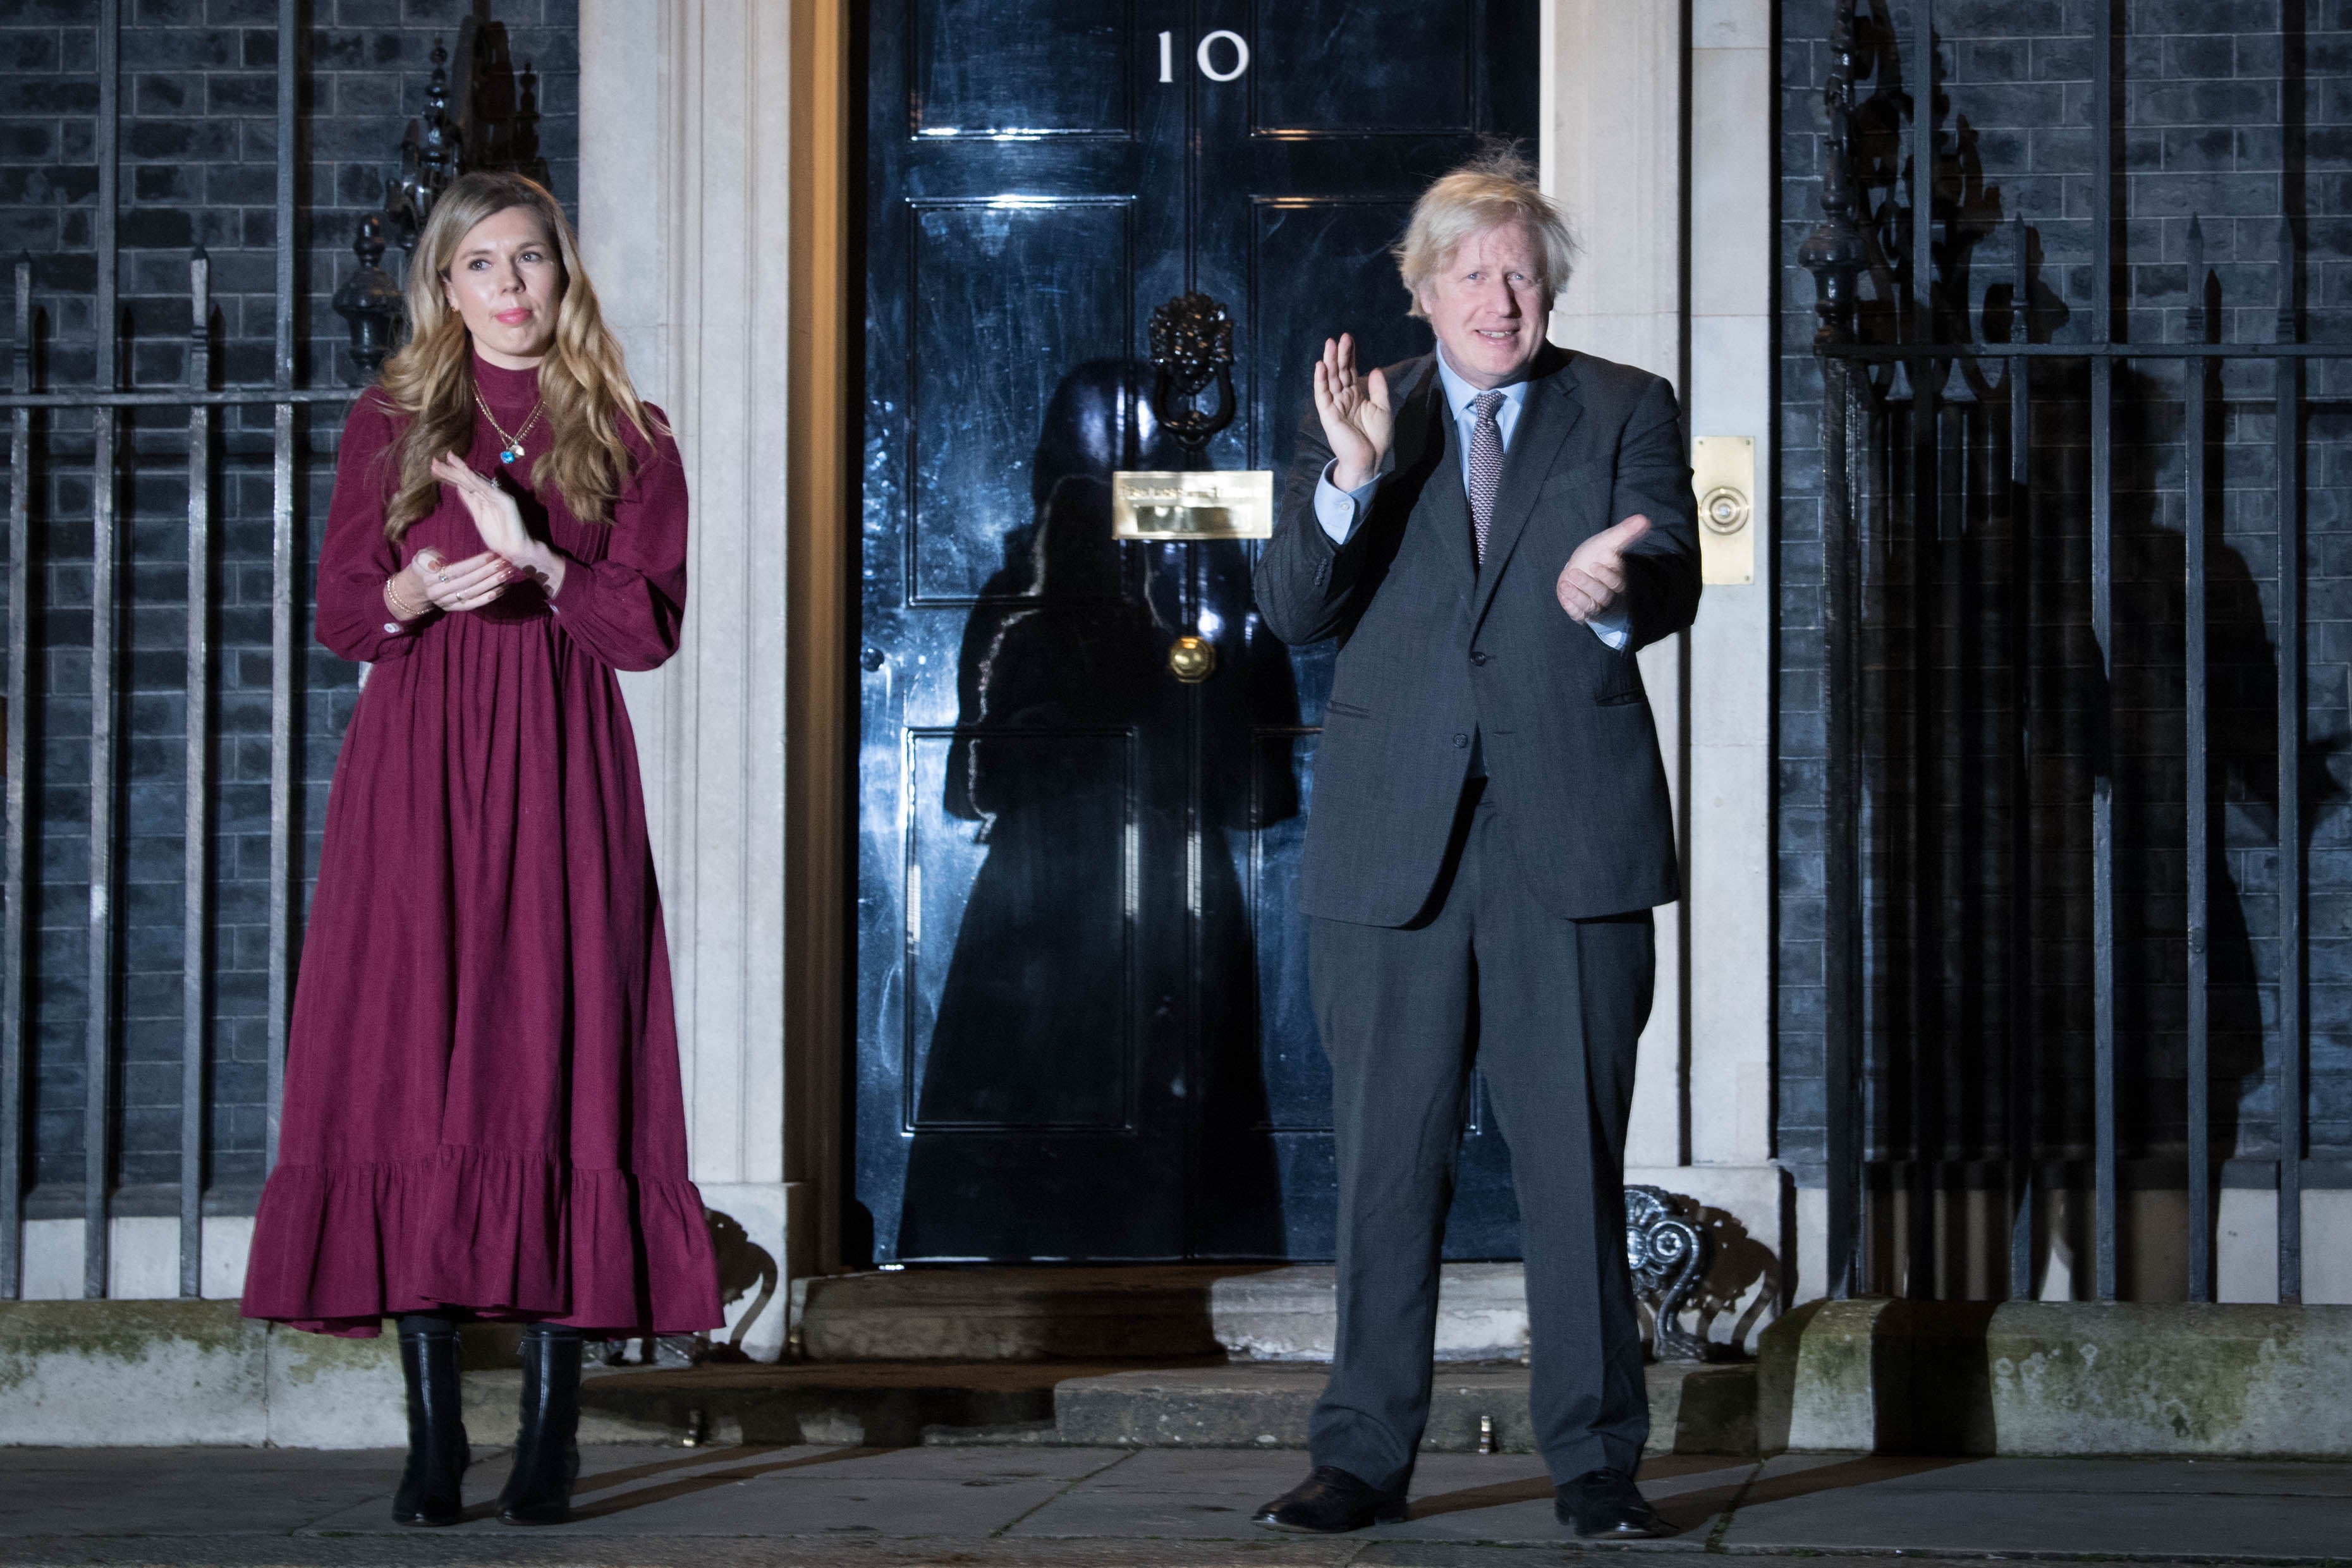 Boris Johnson and his partner Carrie Symonds clap outside 10 Downing Street on Wednesday